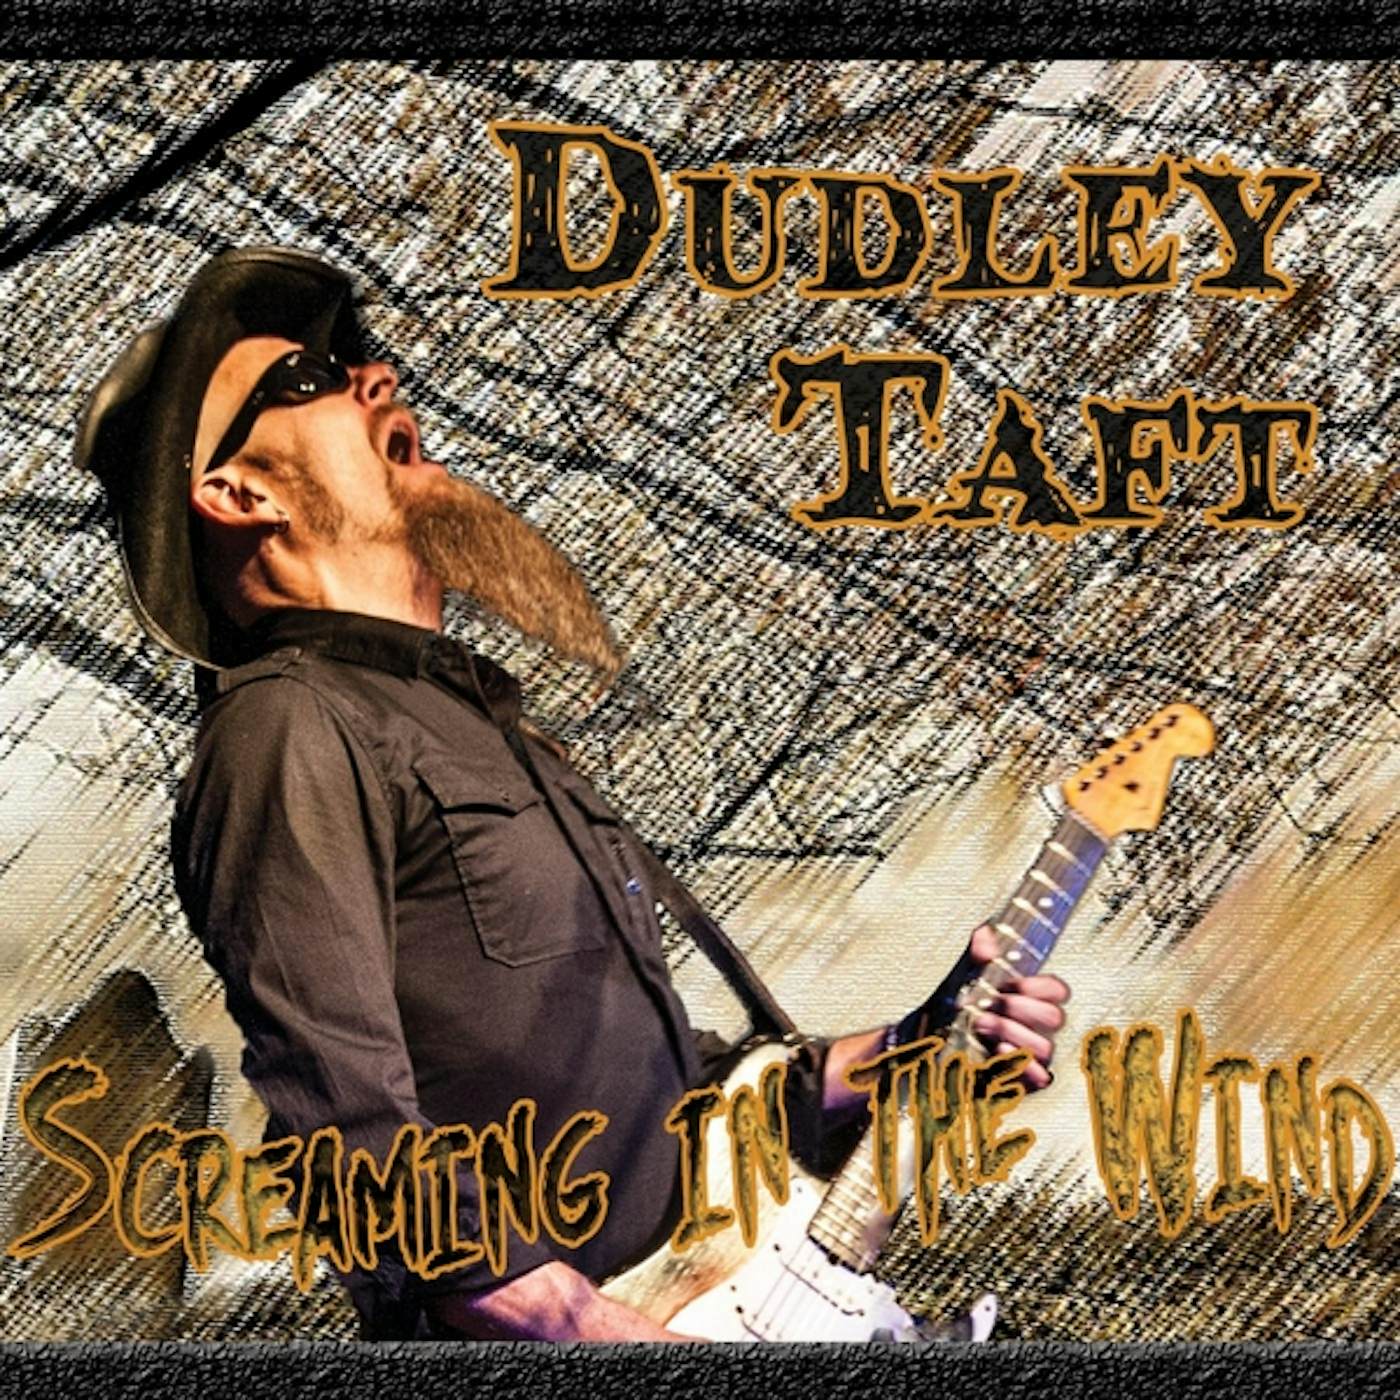 Dudley Taft SCREAMING IN THE WIND CD